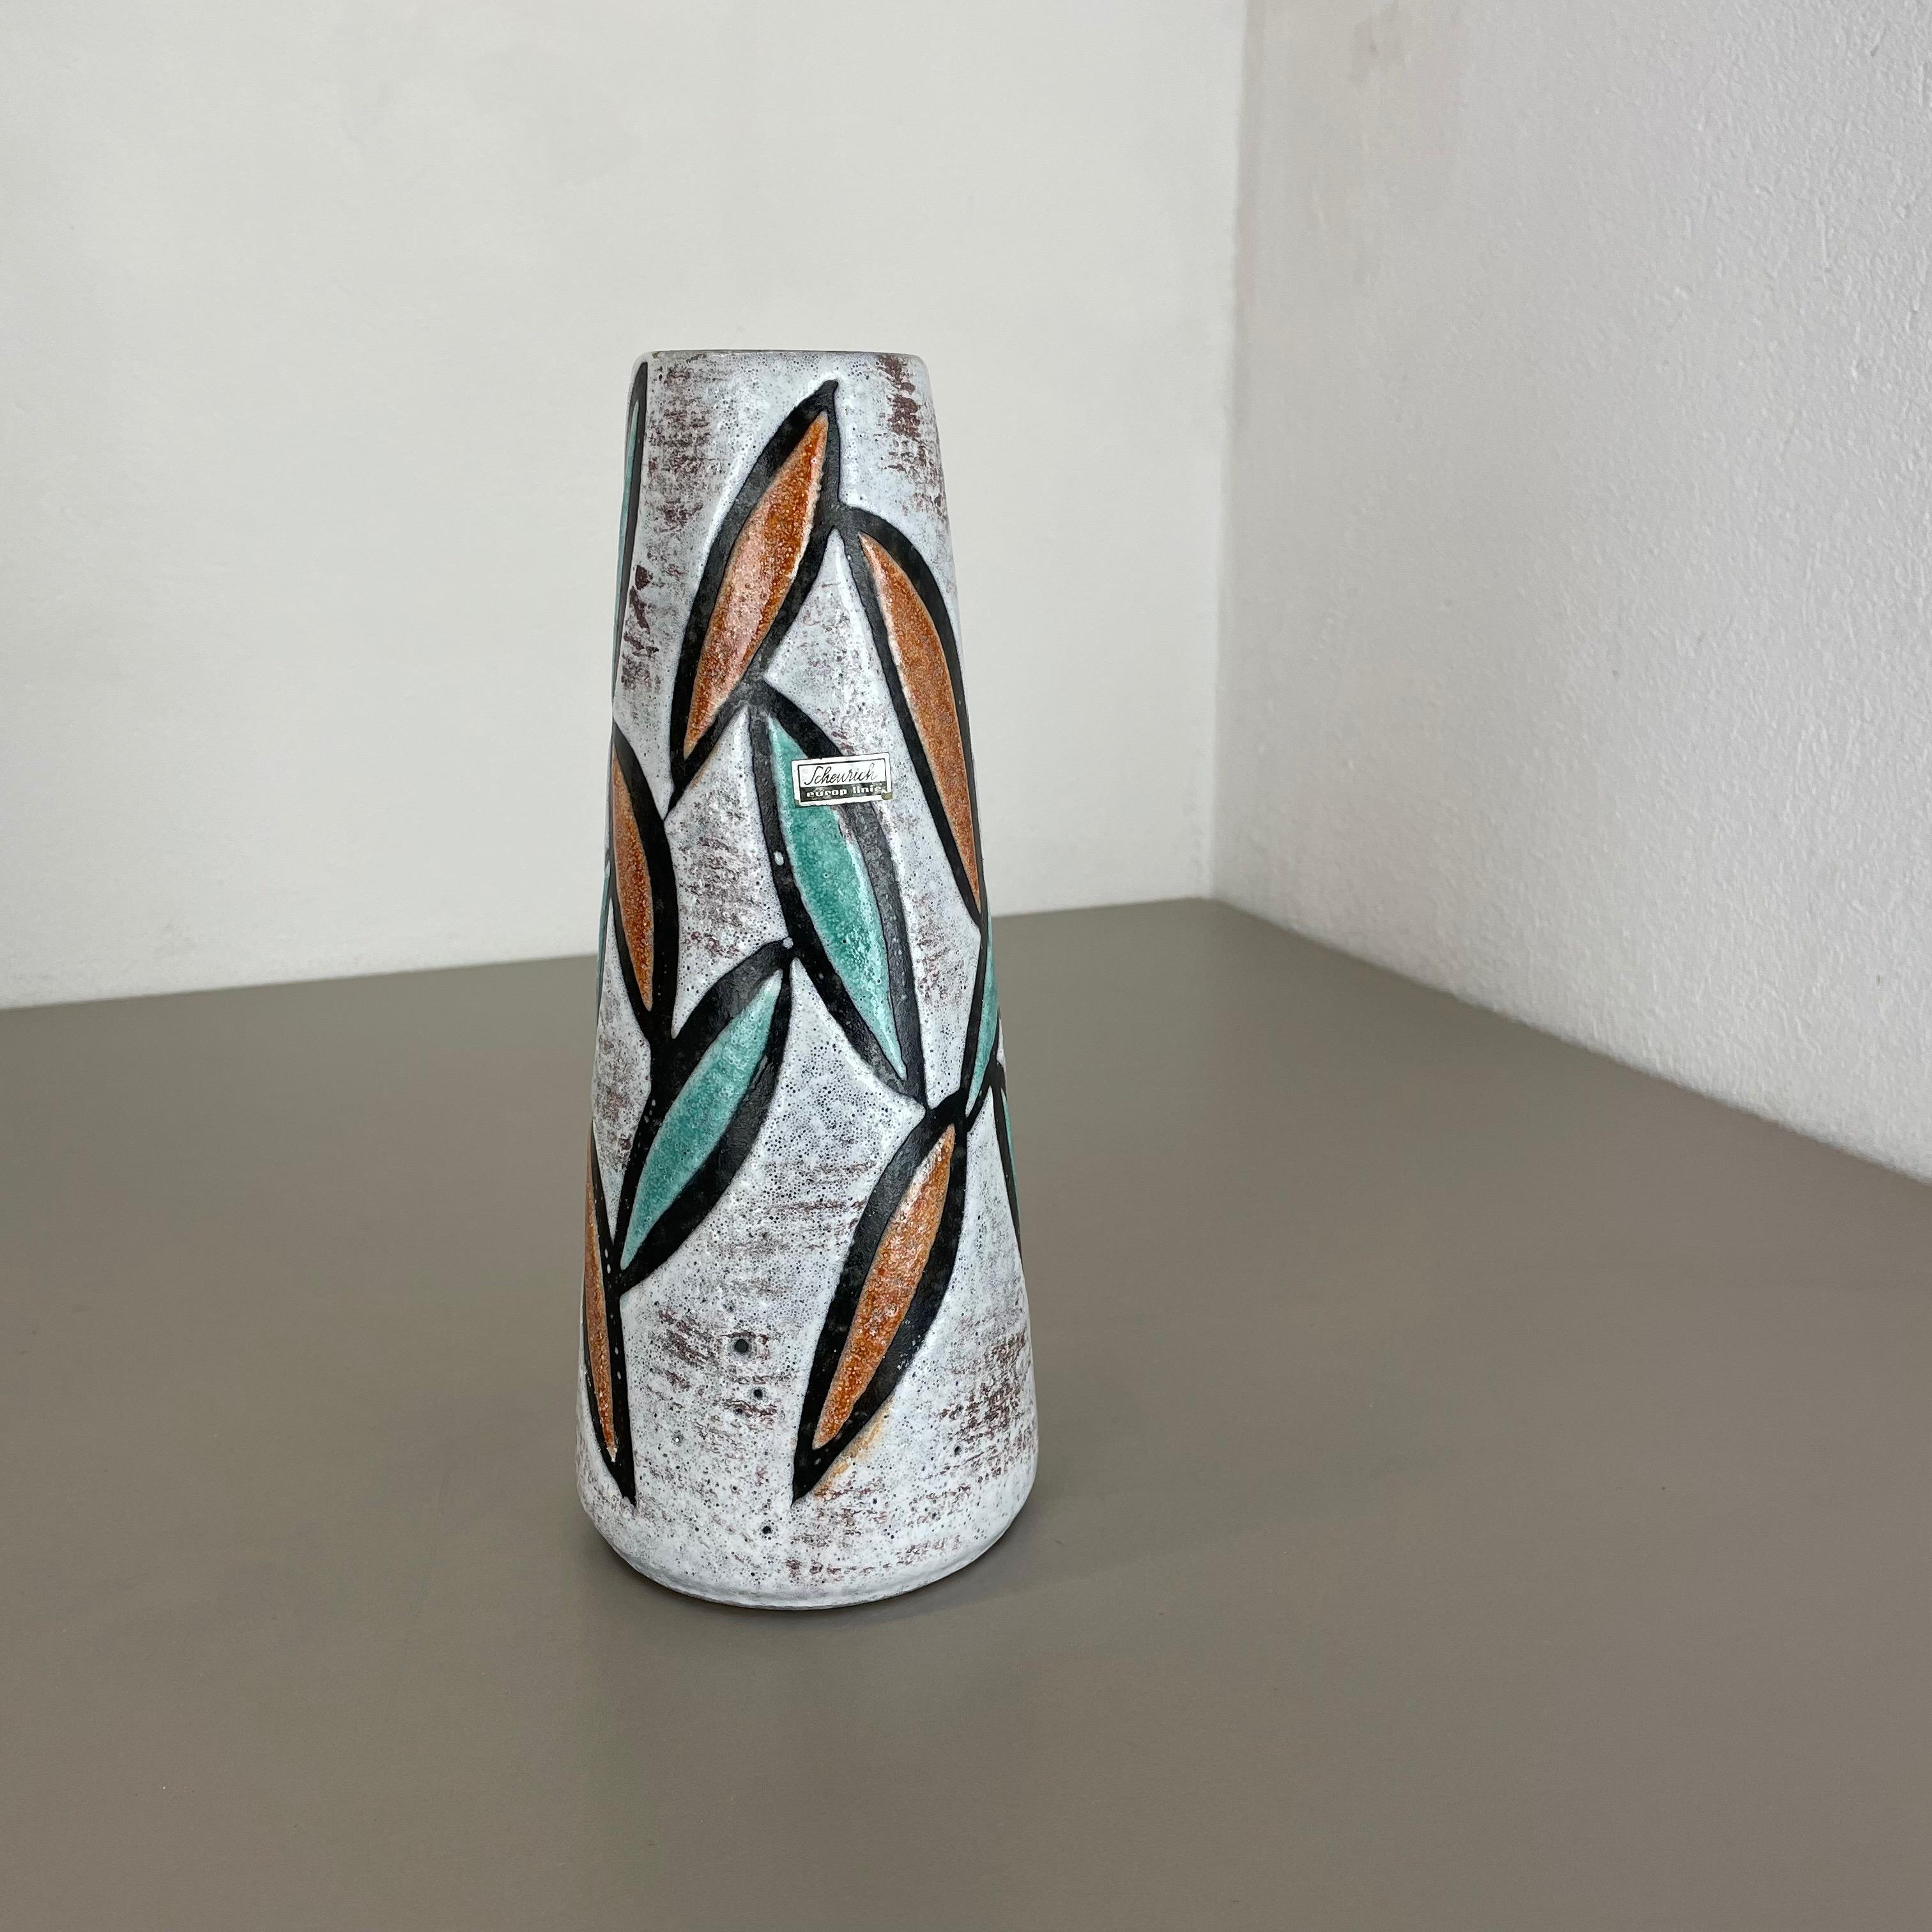 Article:

Fat lava art vase, abstract floral illustration


Producer:

Scheurich, Germany



Decade:

1970s




This original vintage vase was produced in the 1970s in Germany. It is made of ceramic pottery in fat lava optic with